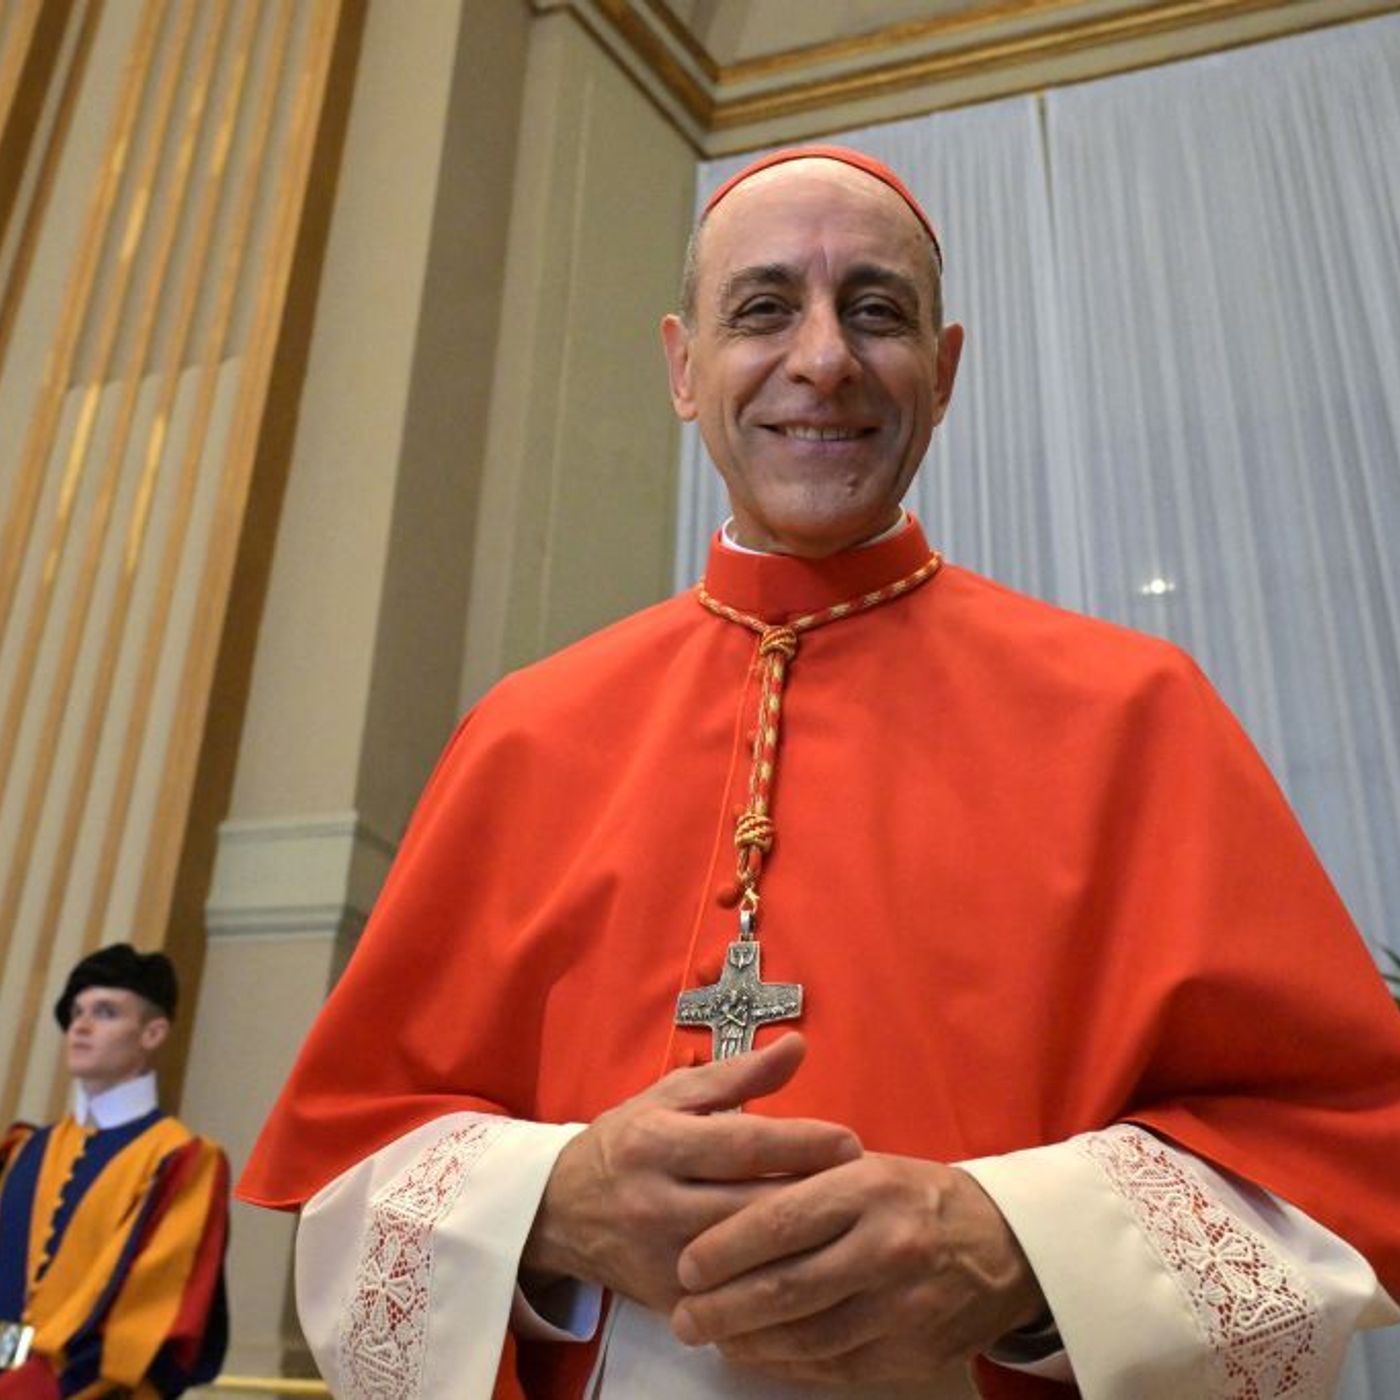 Gay blessings and theological porn: why leading cardinals are distancing themselves from Pope Francis